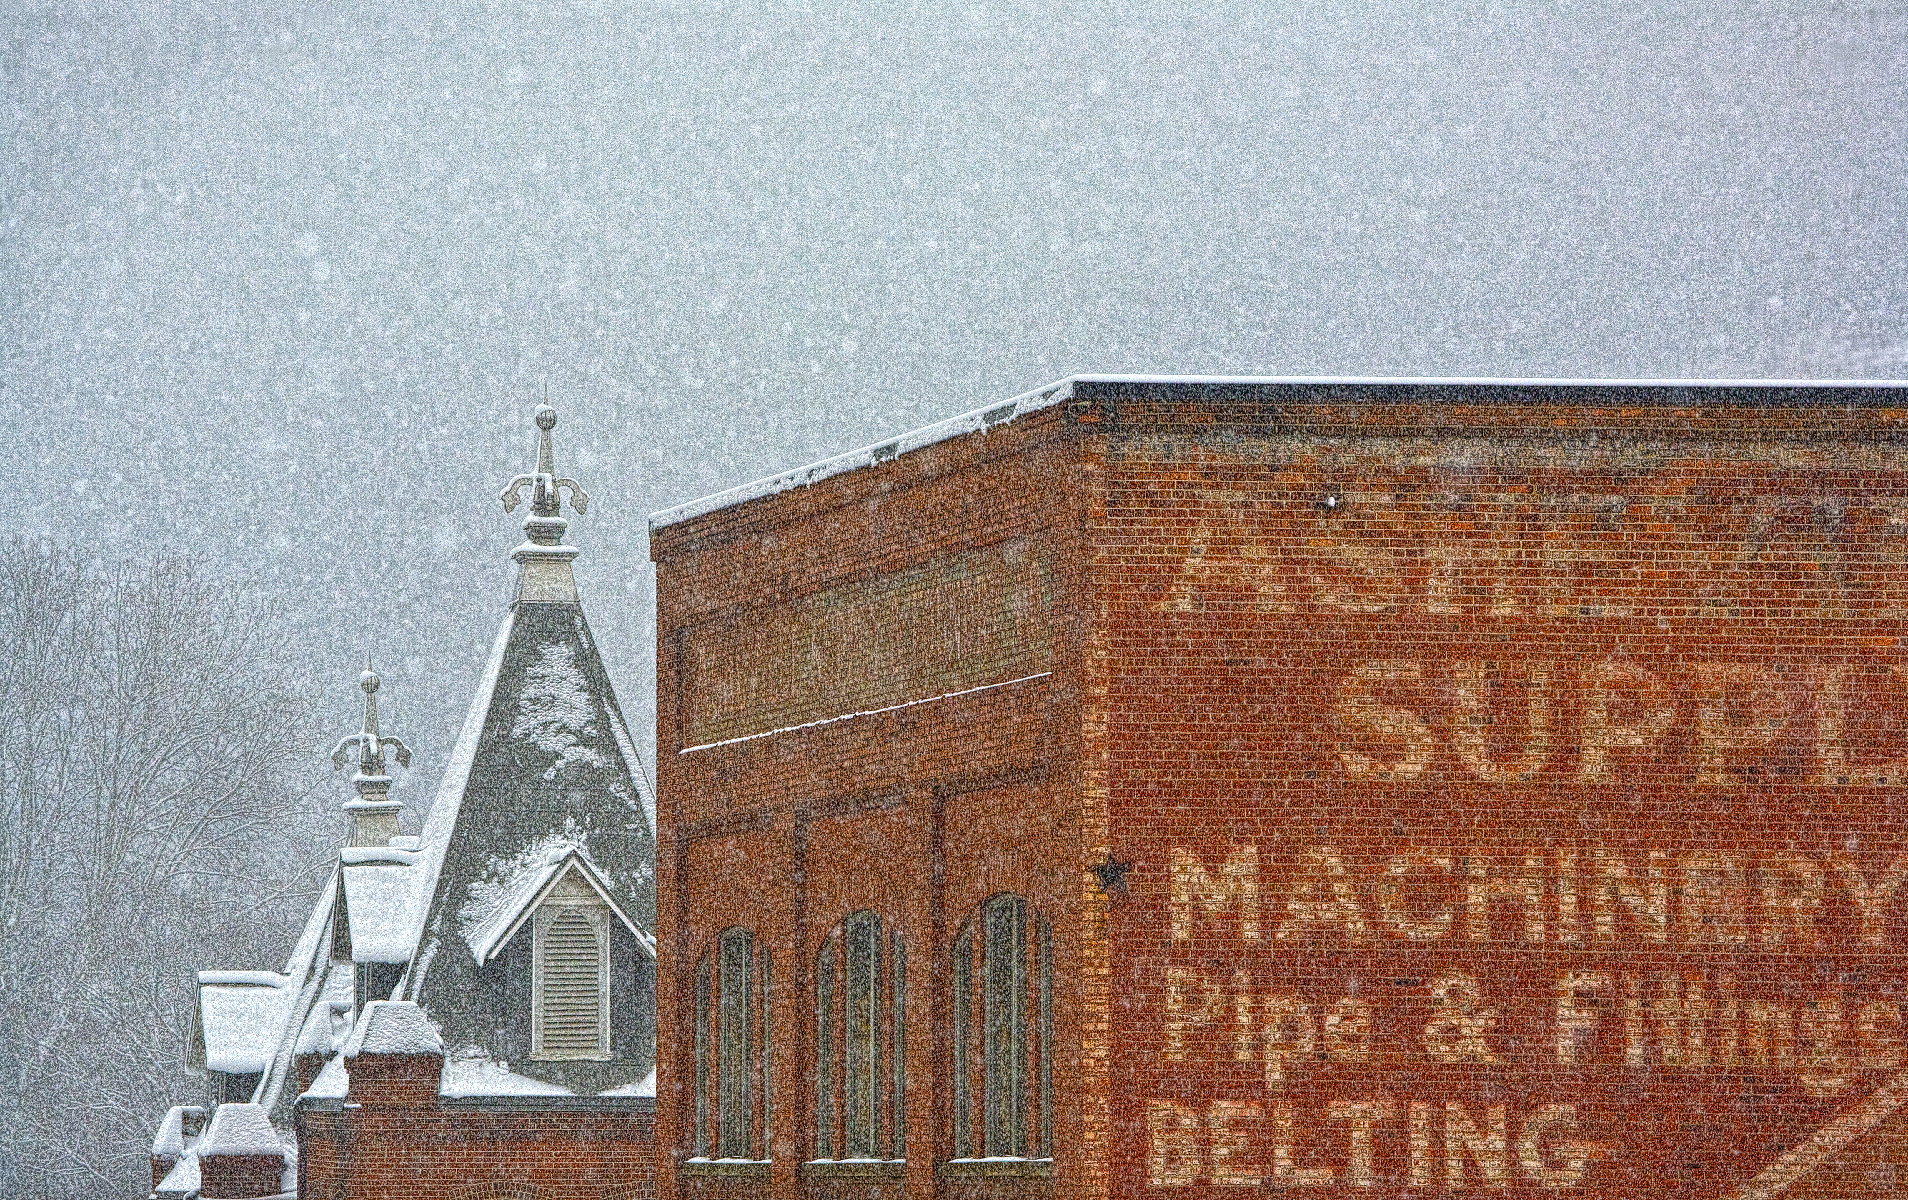 "Asheville Supply" Old Wall Sign and Steeple in Snow, Asheville, NC